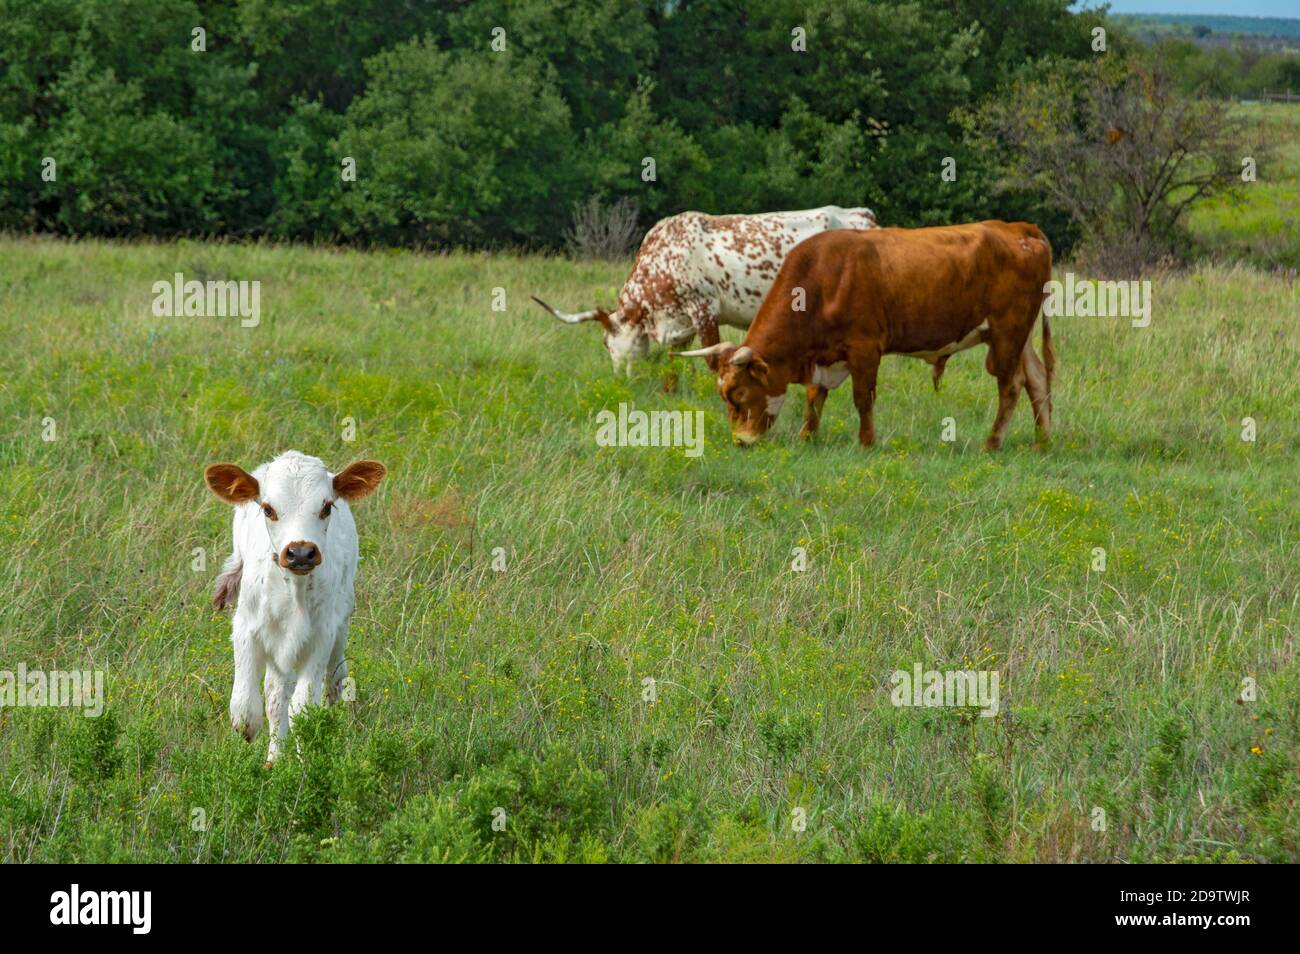 Texas Forts Trail, Shackelford County, Albany, Fort Griffin State Historic Site, Longhorn Cattle, Kalb Stockfoto